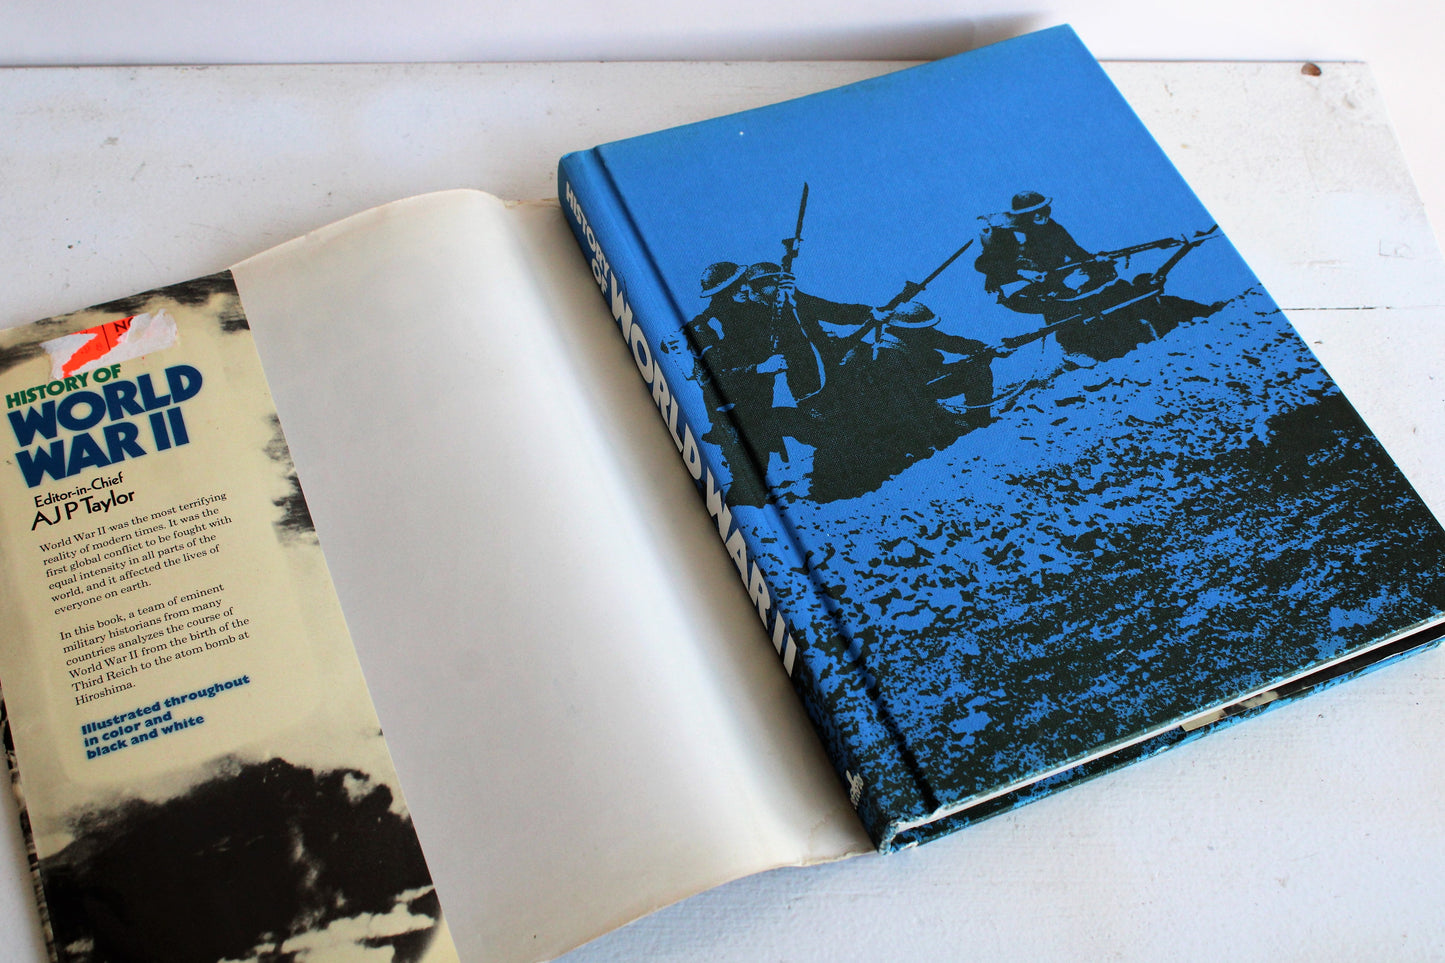 Vintage 1970s " History of World War Two" Book